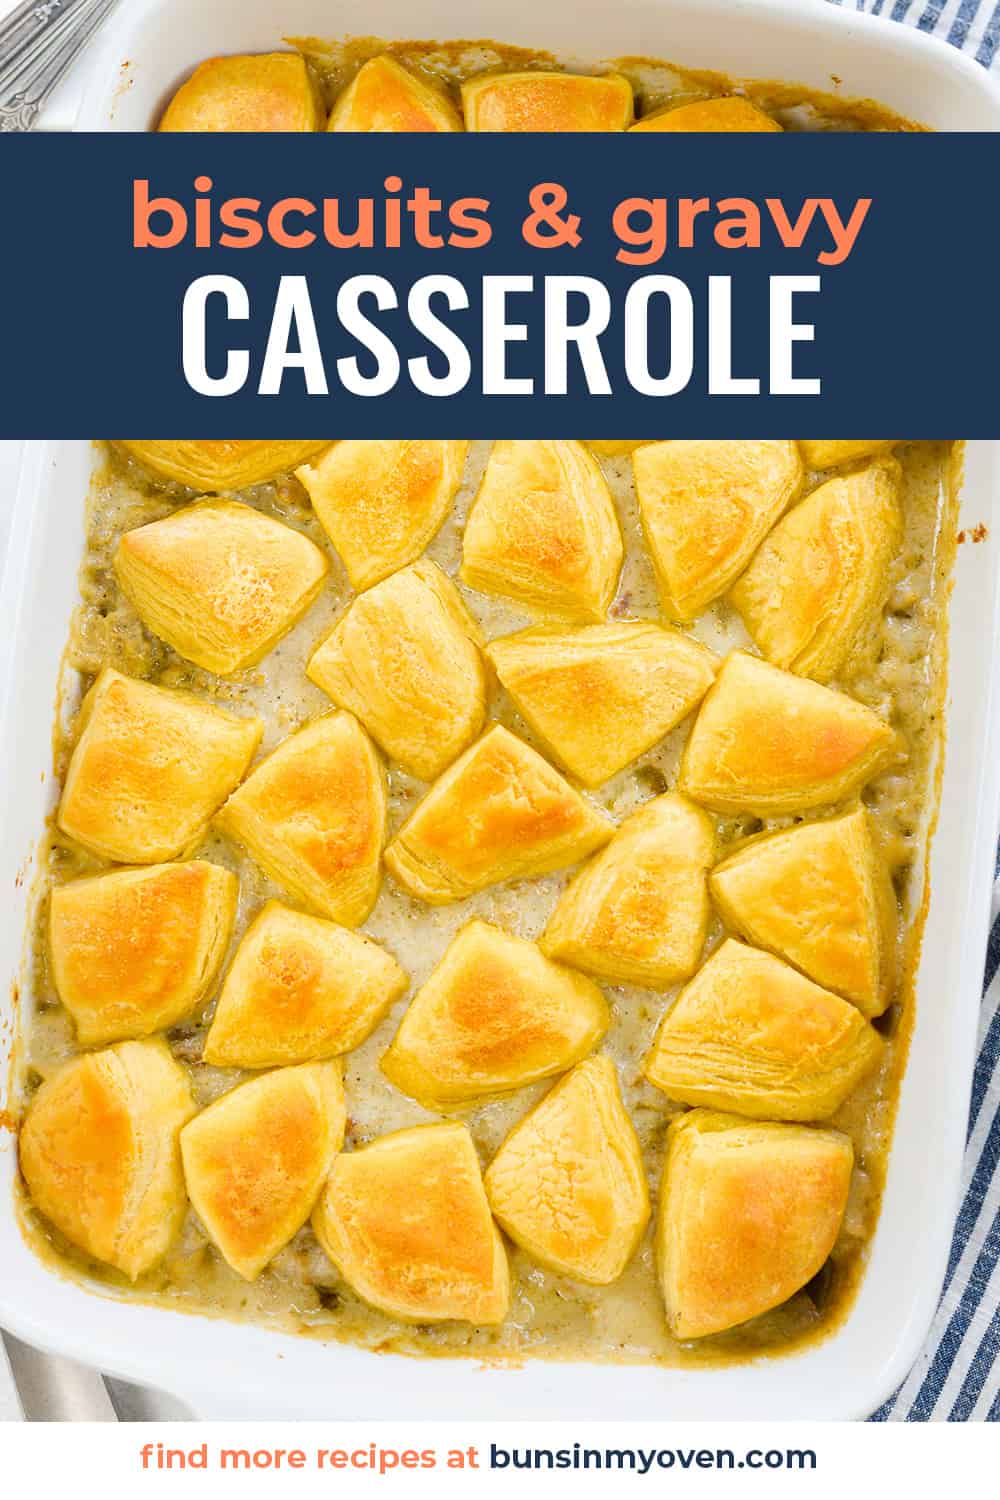 Biscuit and gravy casserole in white baking dish.